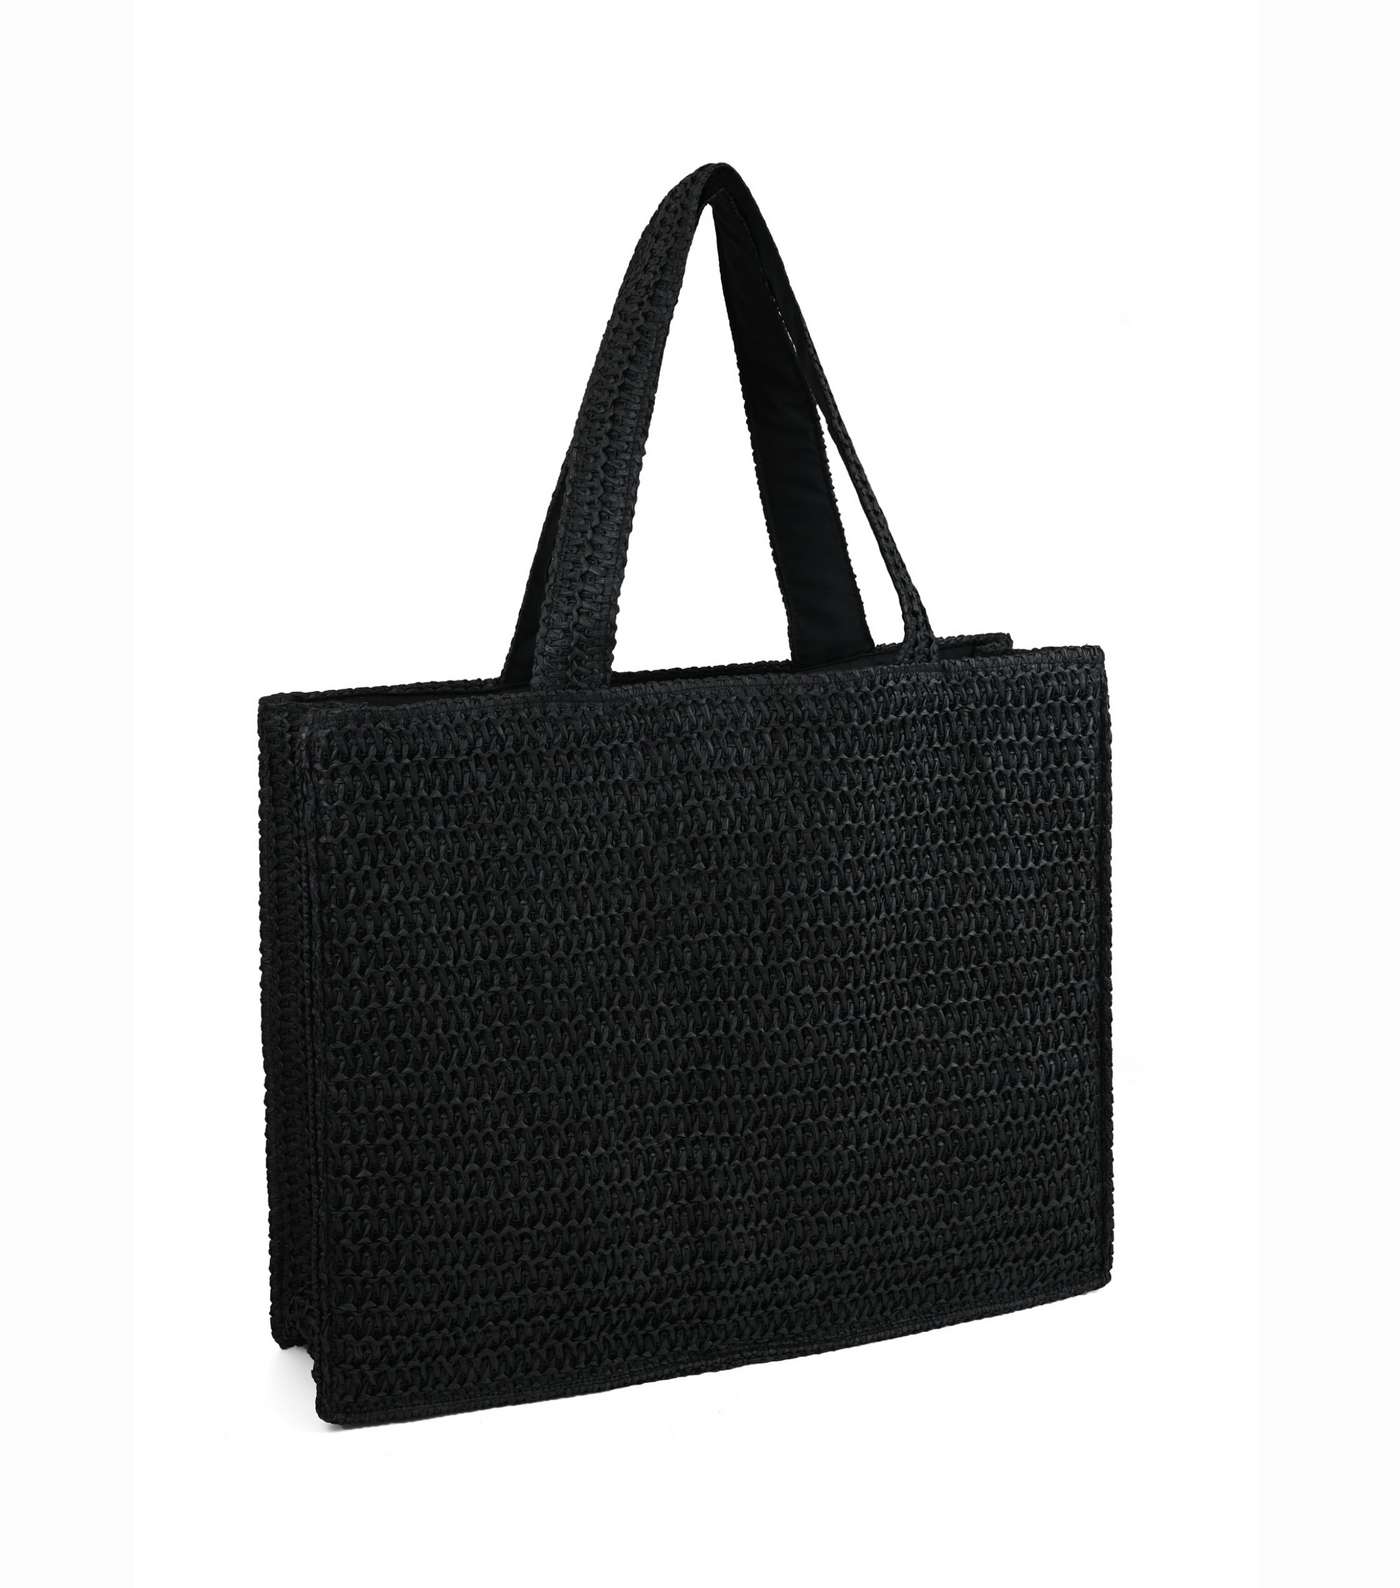 South Beach Black Woven Straw Effect Tote Bag Image 4